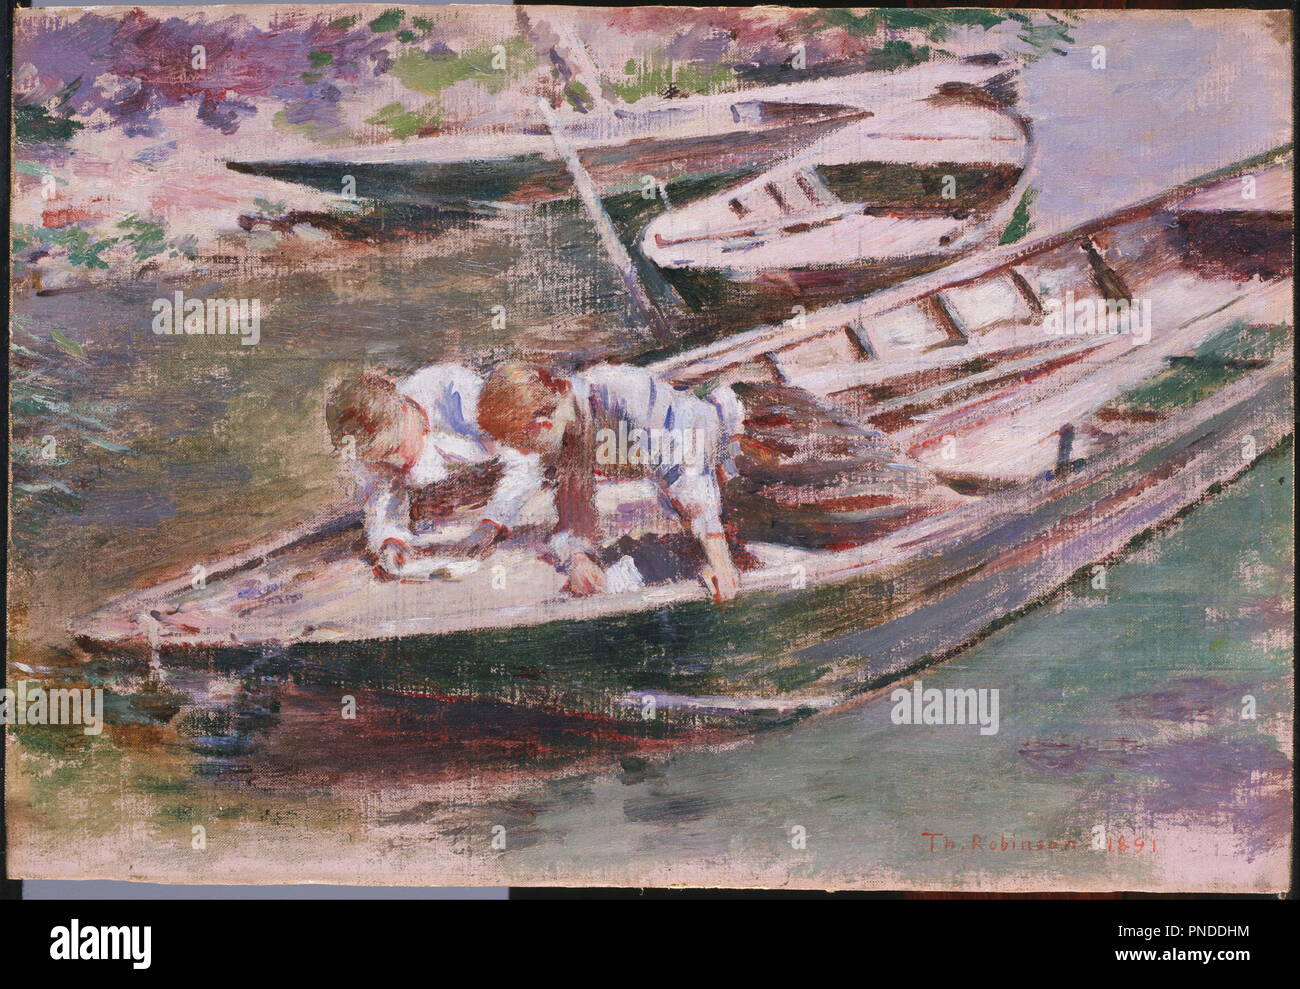 Two in a Boat. Date/Period: 1891. Painting. Oil on canvas adhered to cardboard. Height: 238 mm (9.37 in); Width: 349 mm (13.74 in). Author: Theodore Robinson. Stock Photo